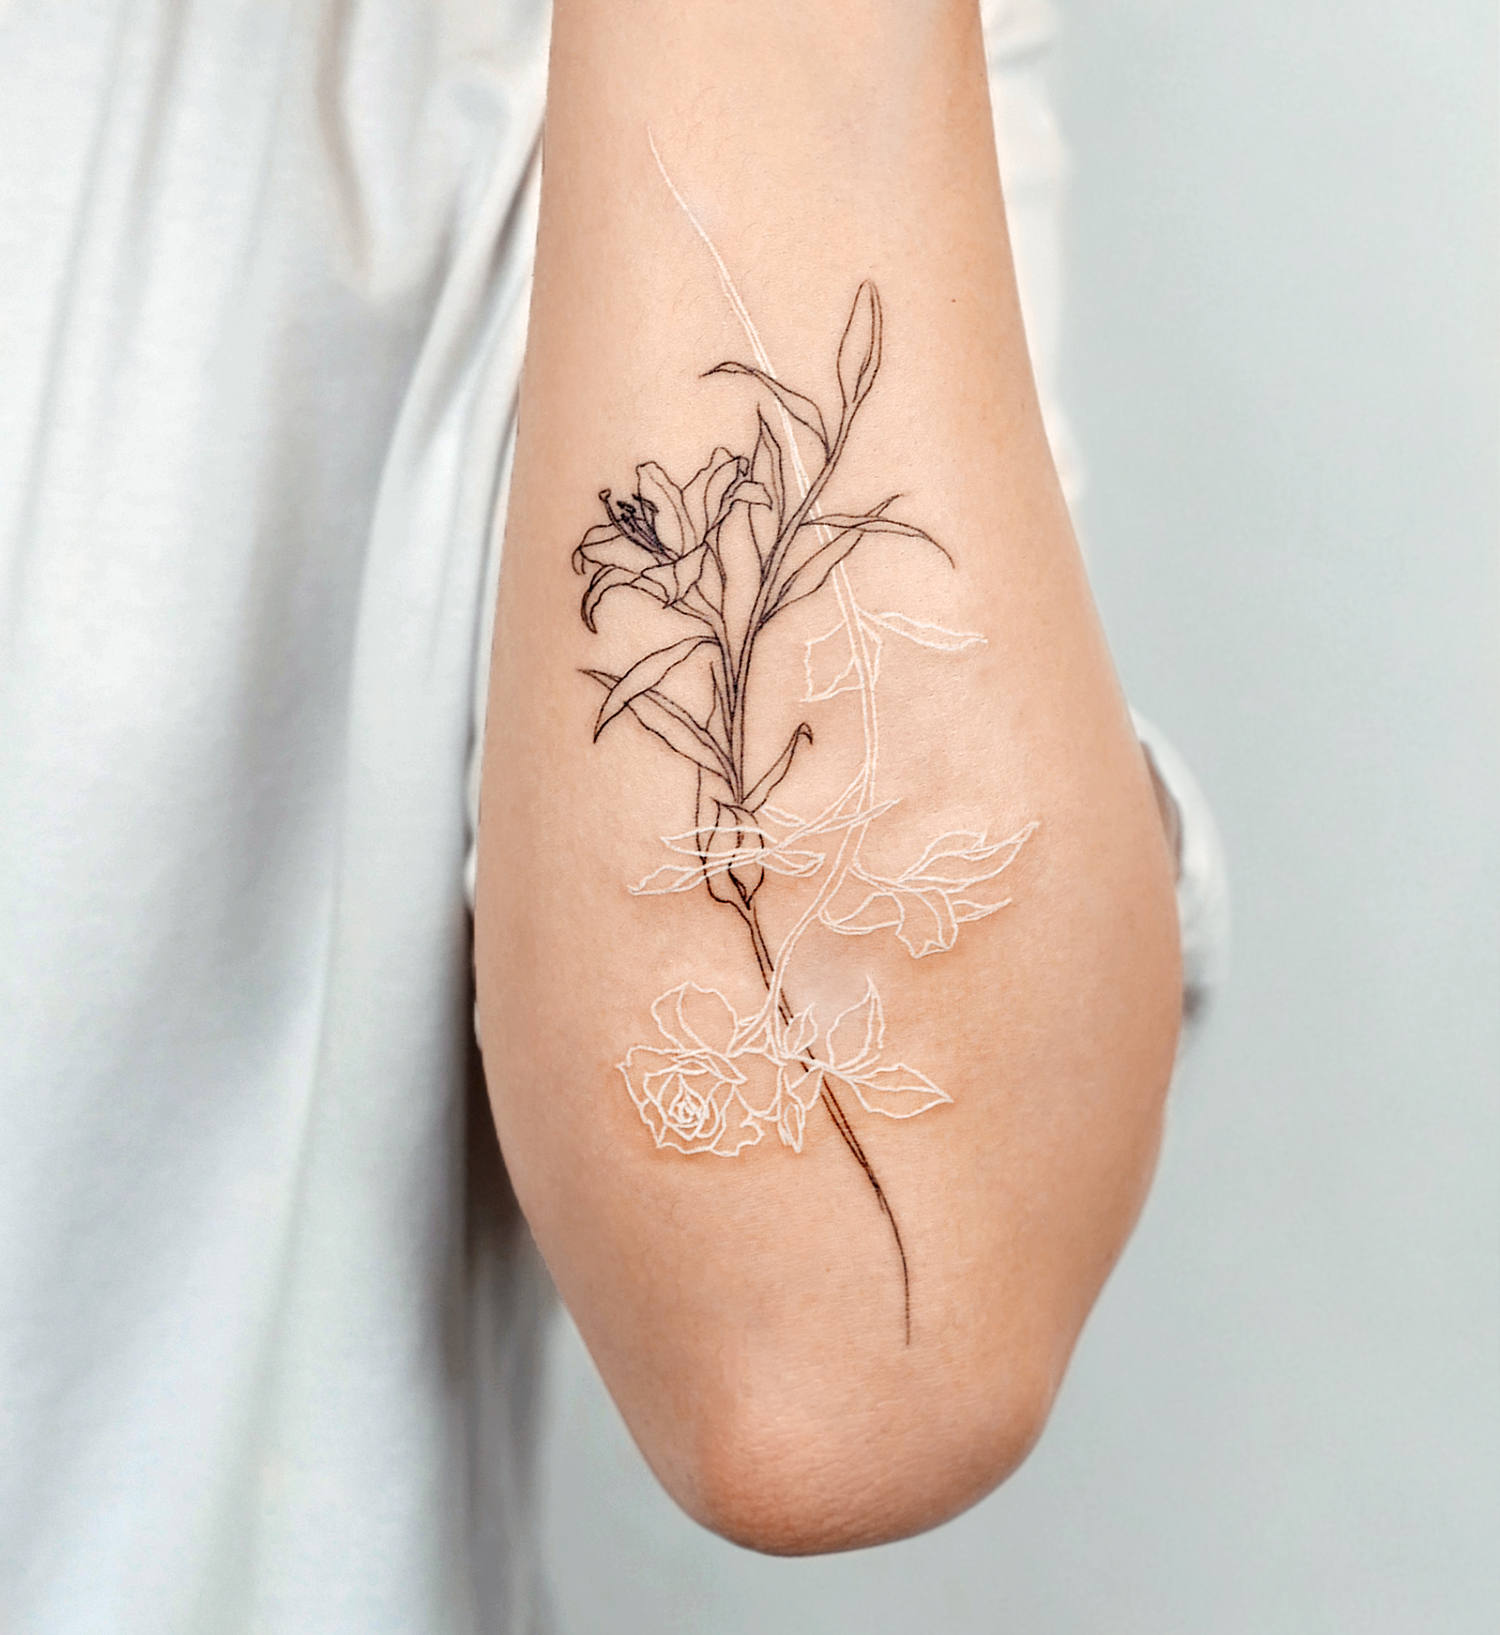 Although this tattoo is fresh, white ink heals differently than other inks.